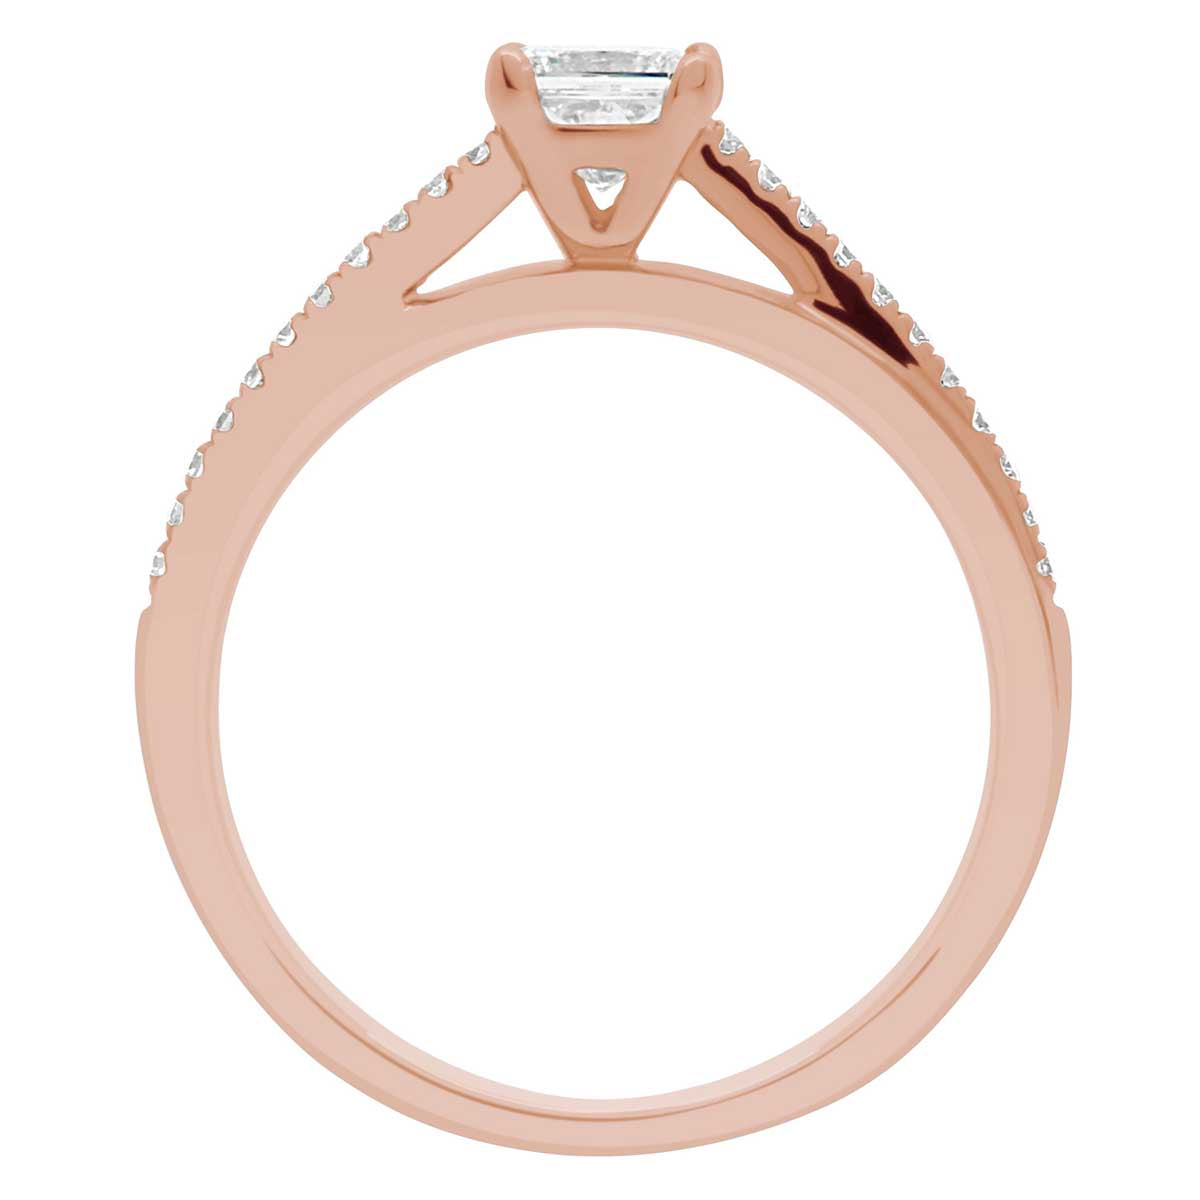 Promise Ring Style made from rose gold and standing upright